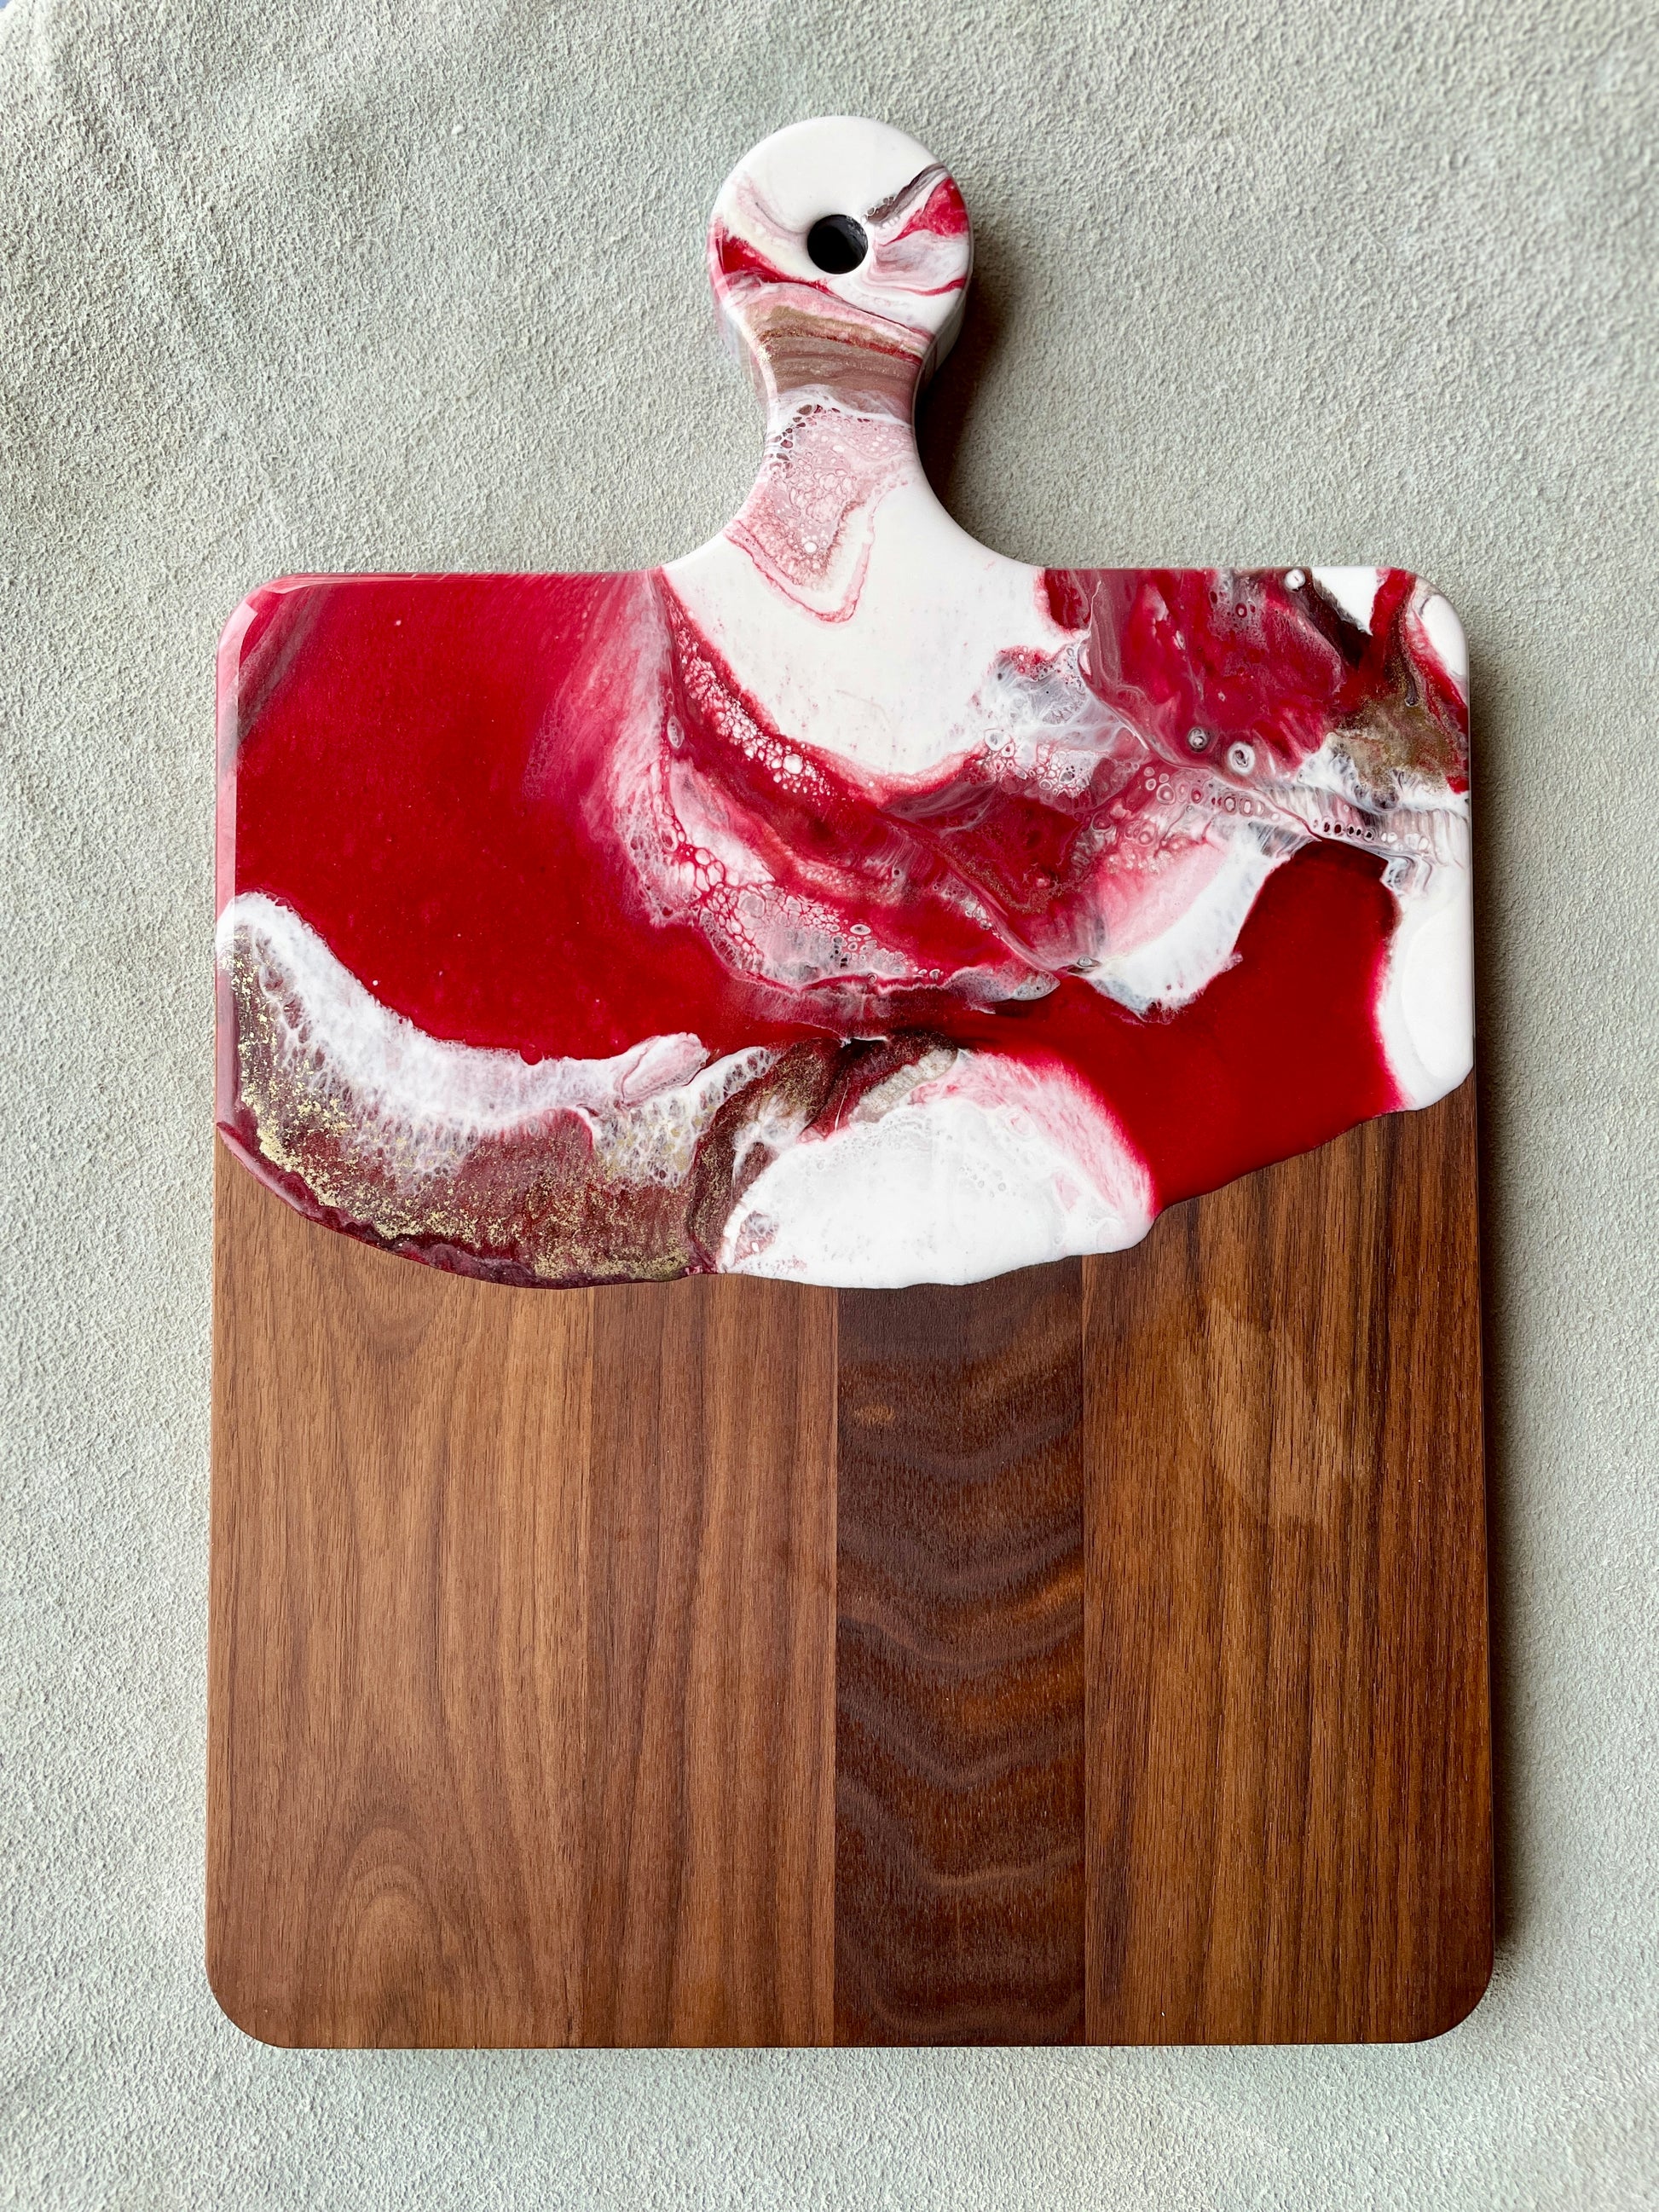 Red, white and gold resin on a walnut charcuterie cheese board